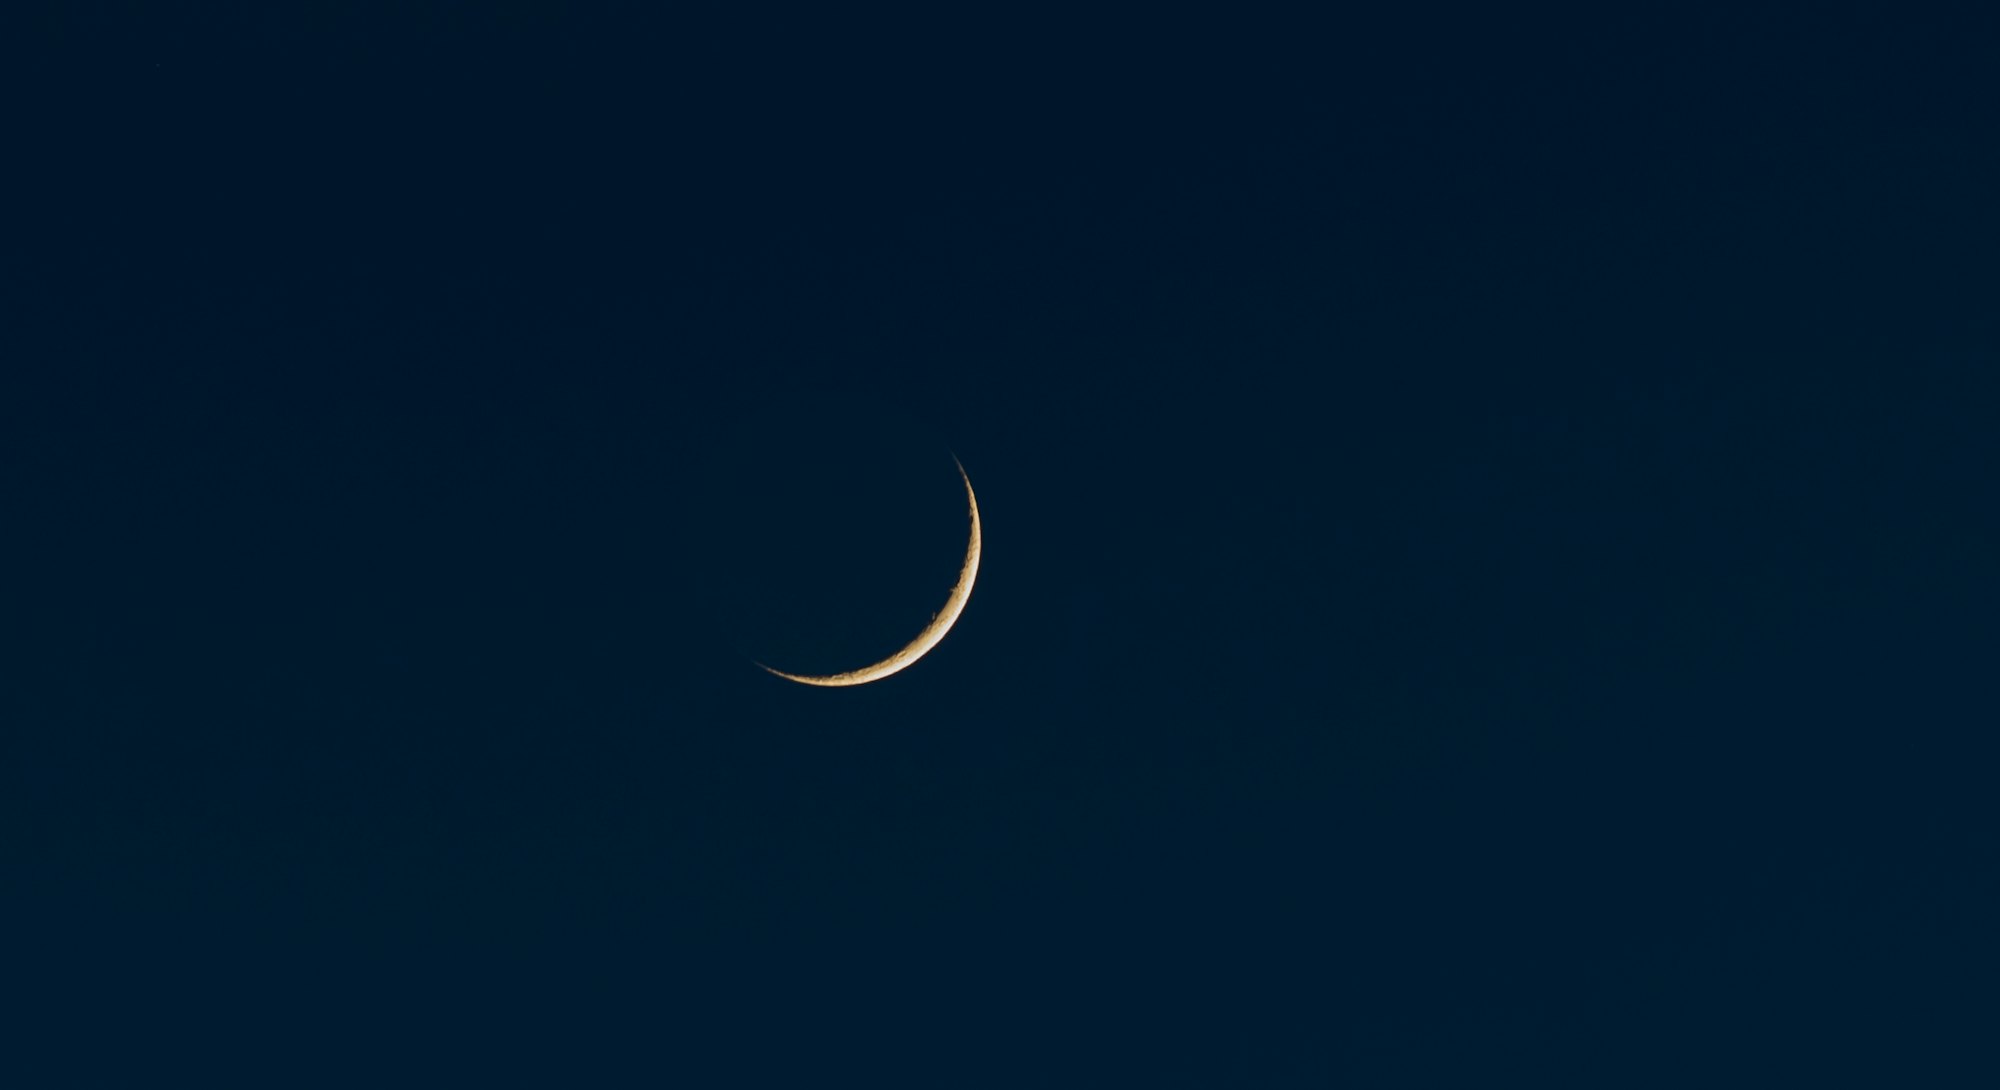 The new moon arrives on the cusp of Mar. 31 and Apr. 1 2022.